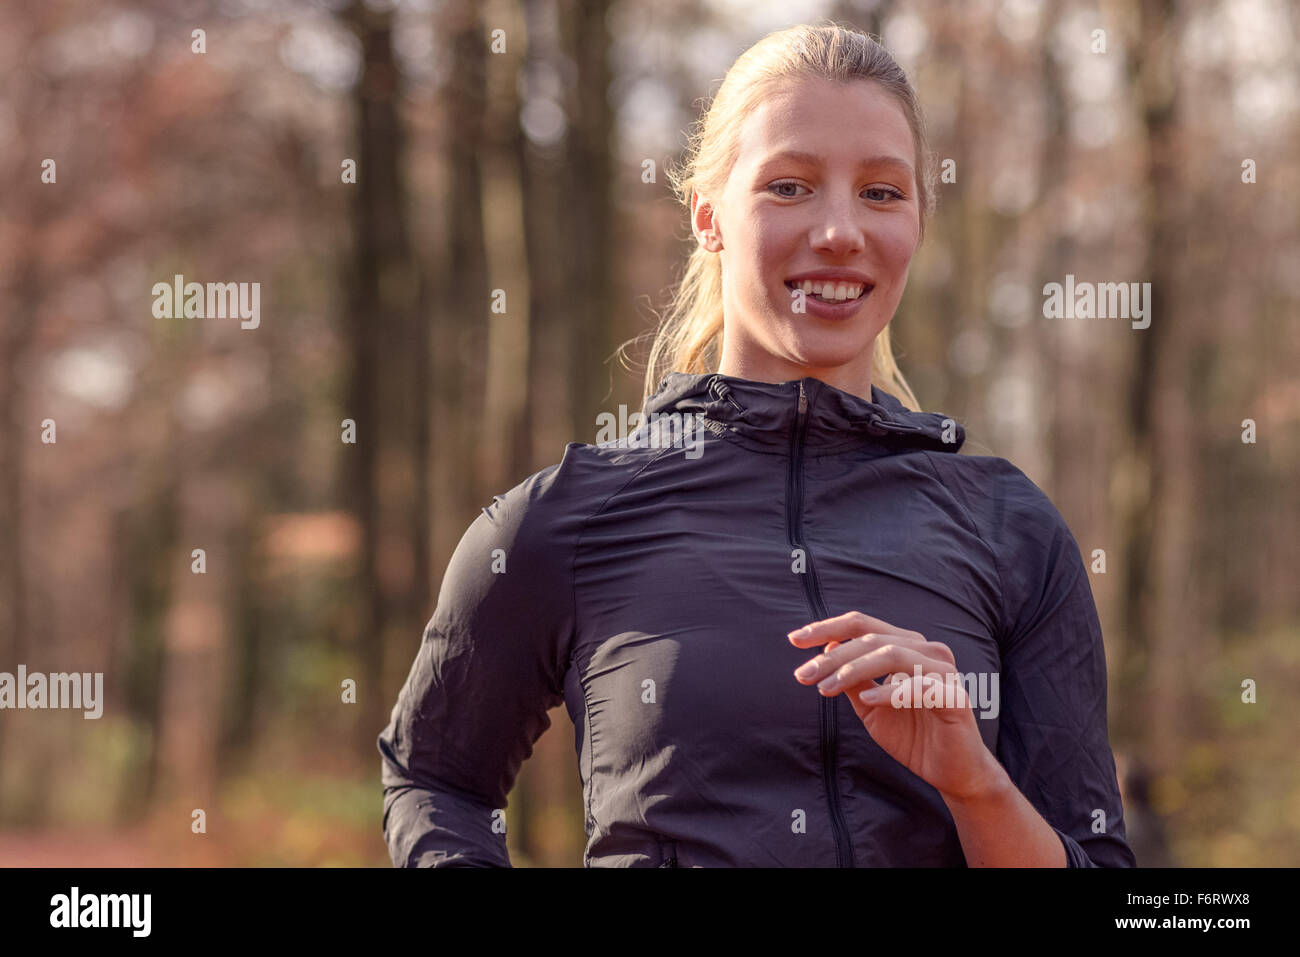 Pretty fit young woman jogging through autumn or fall woodland approaching the camera, close up upper body portrait in a healthy Stock Photo